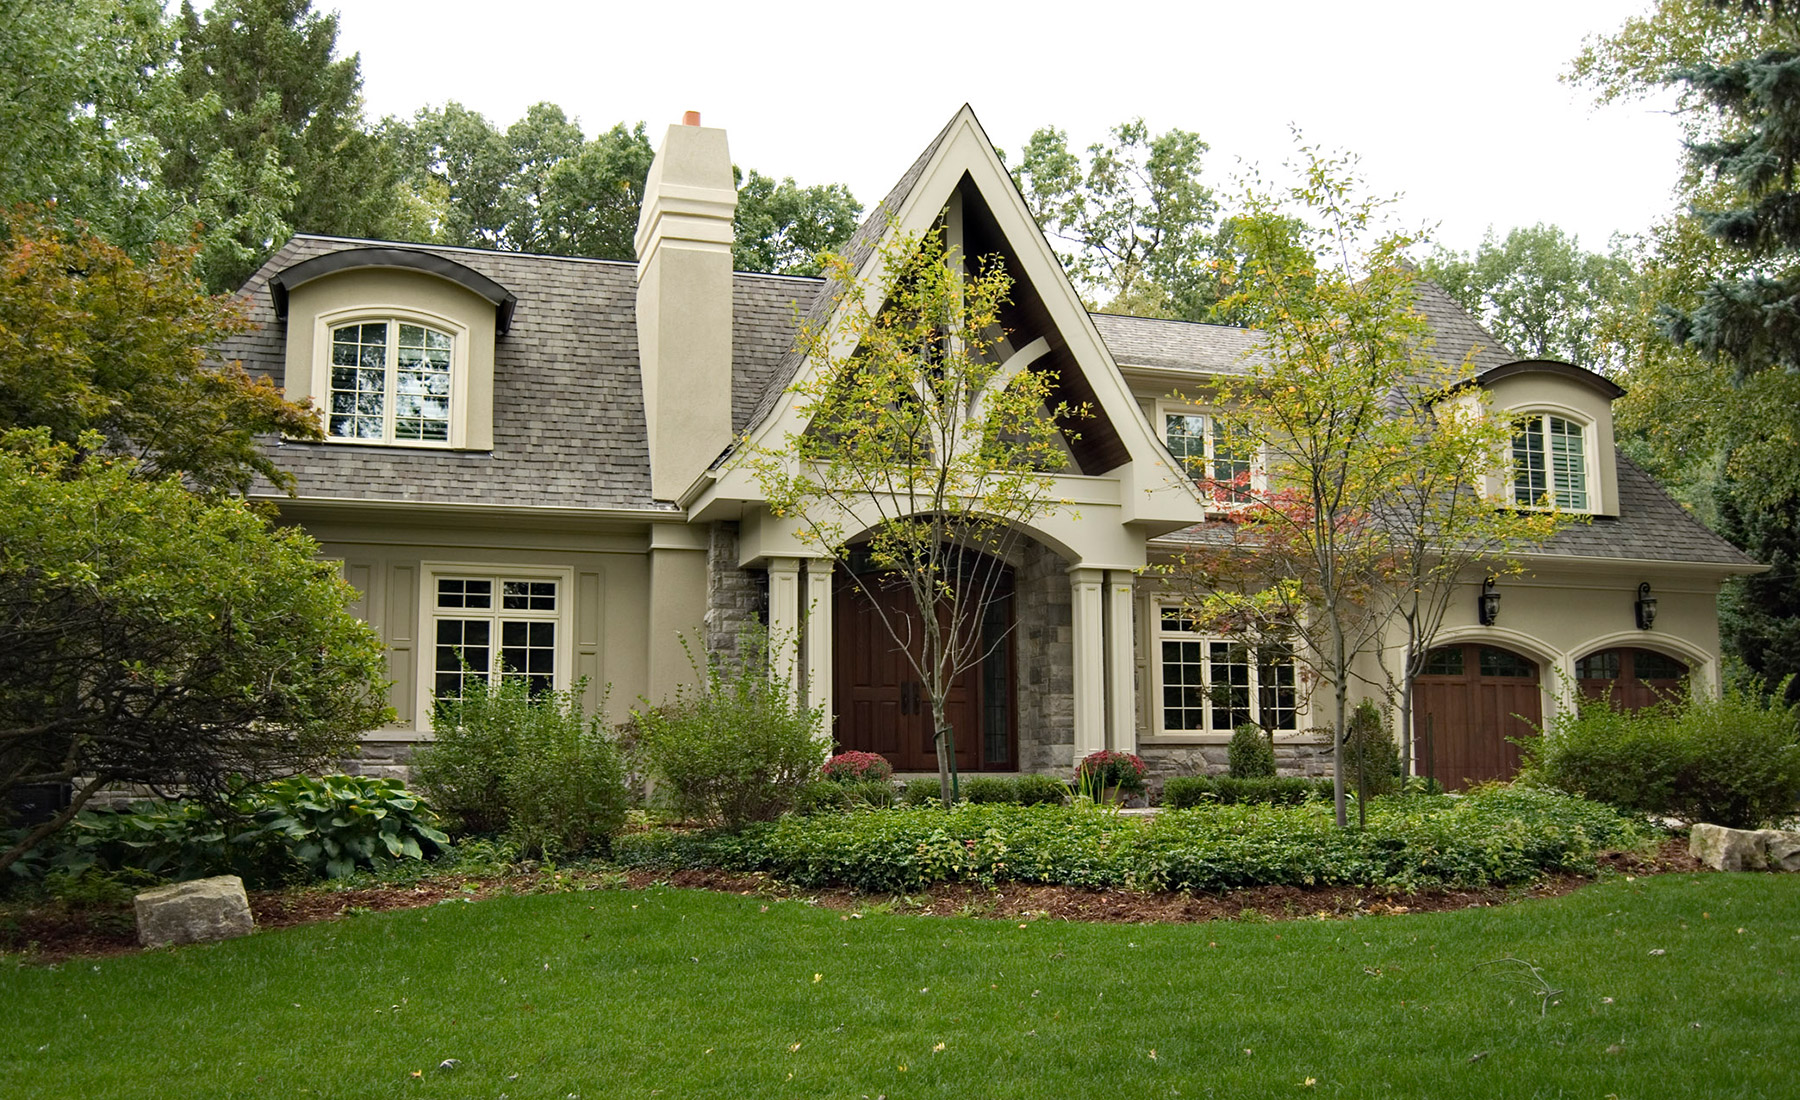 Traditional house with stucco chimney, white frame windows and wood garage doors.